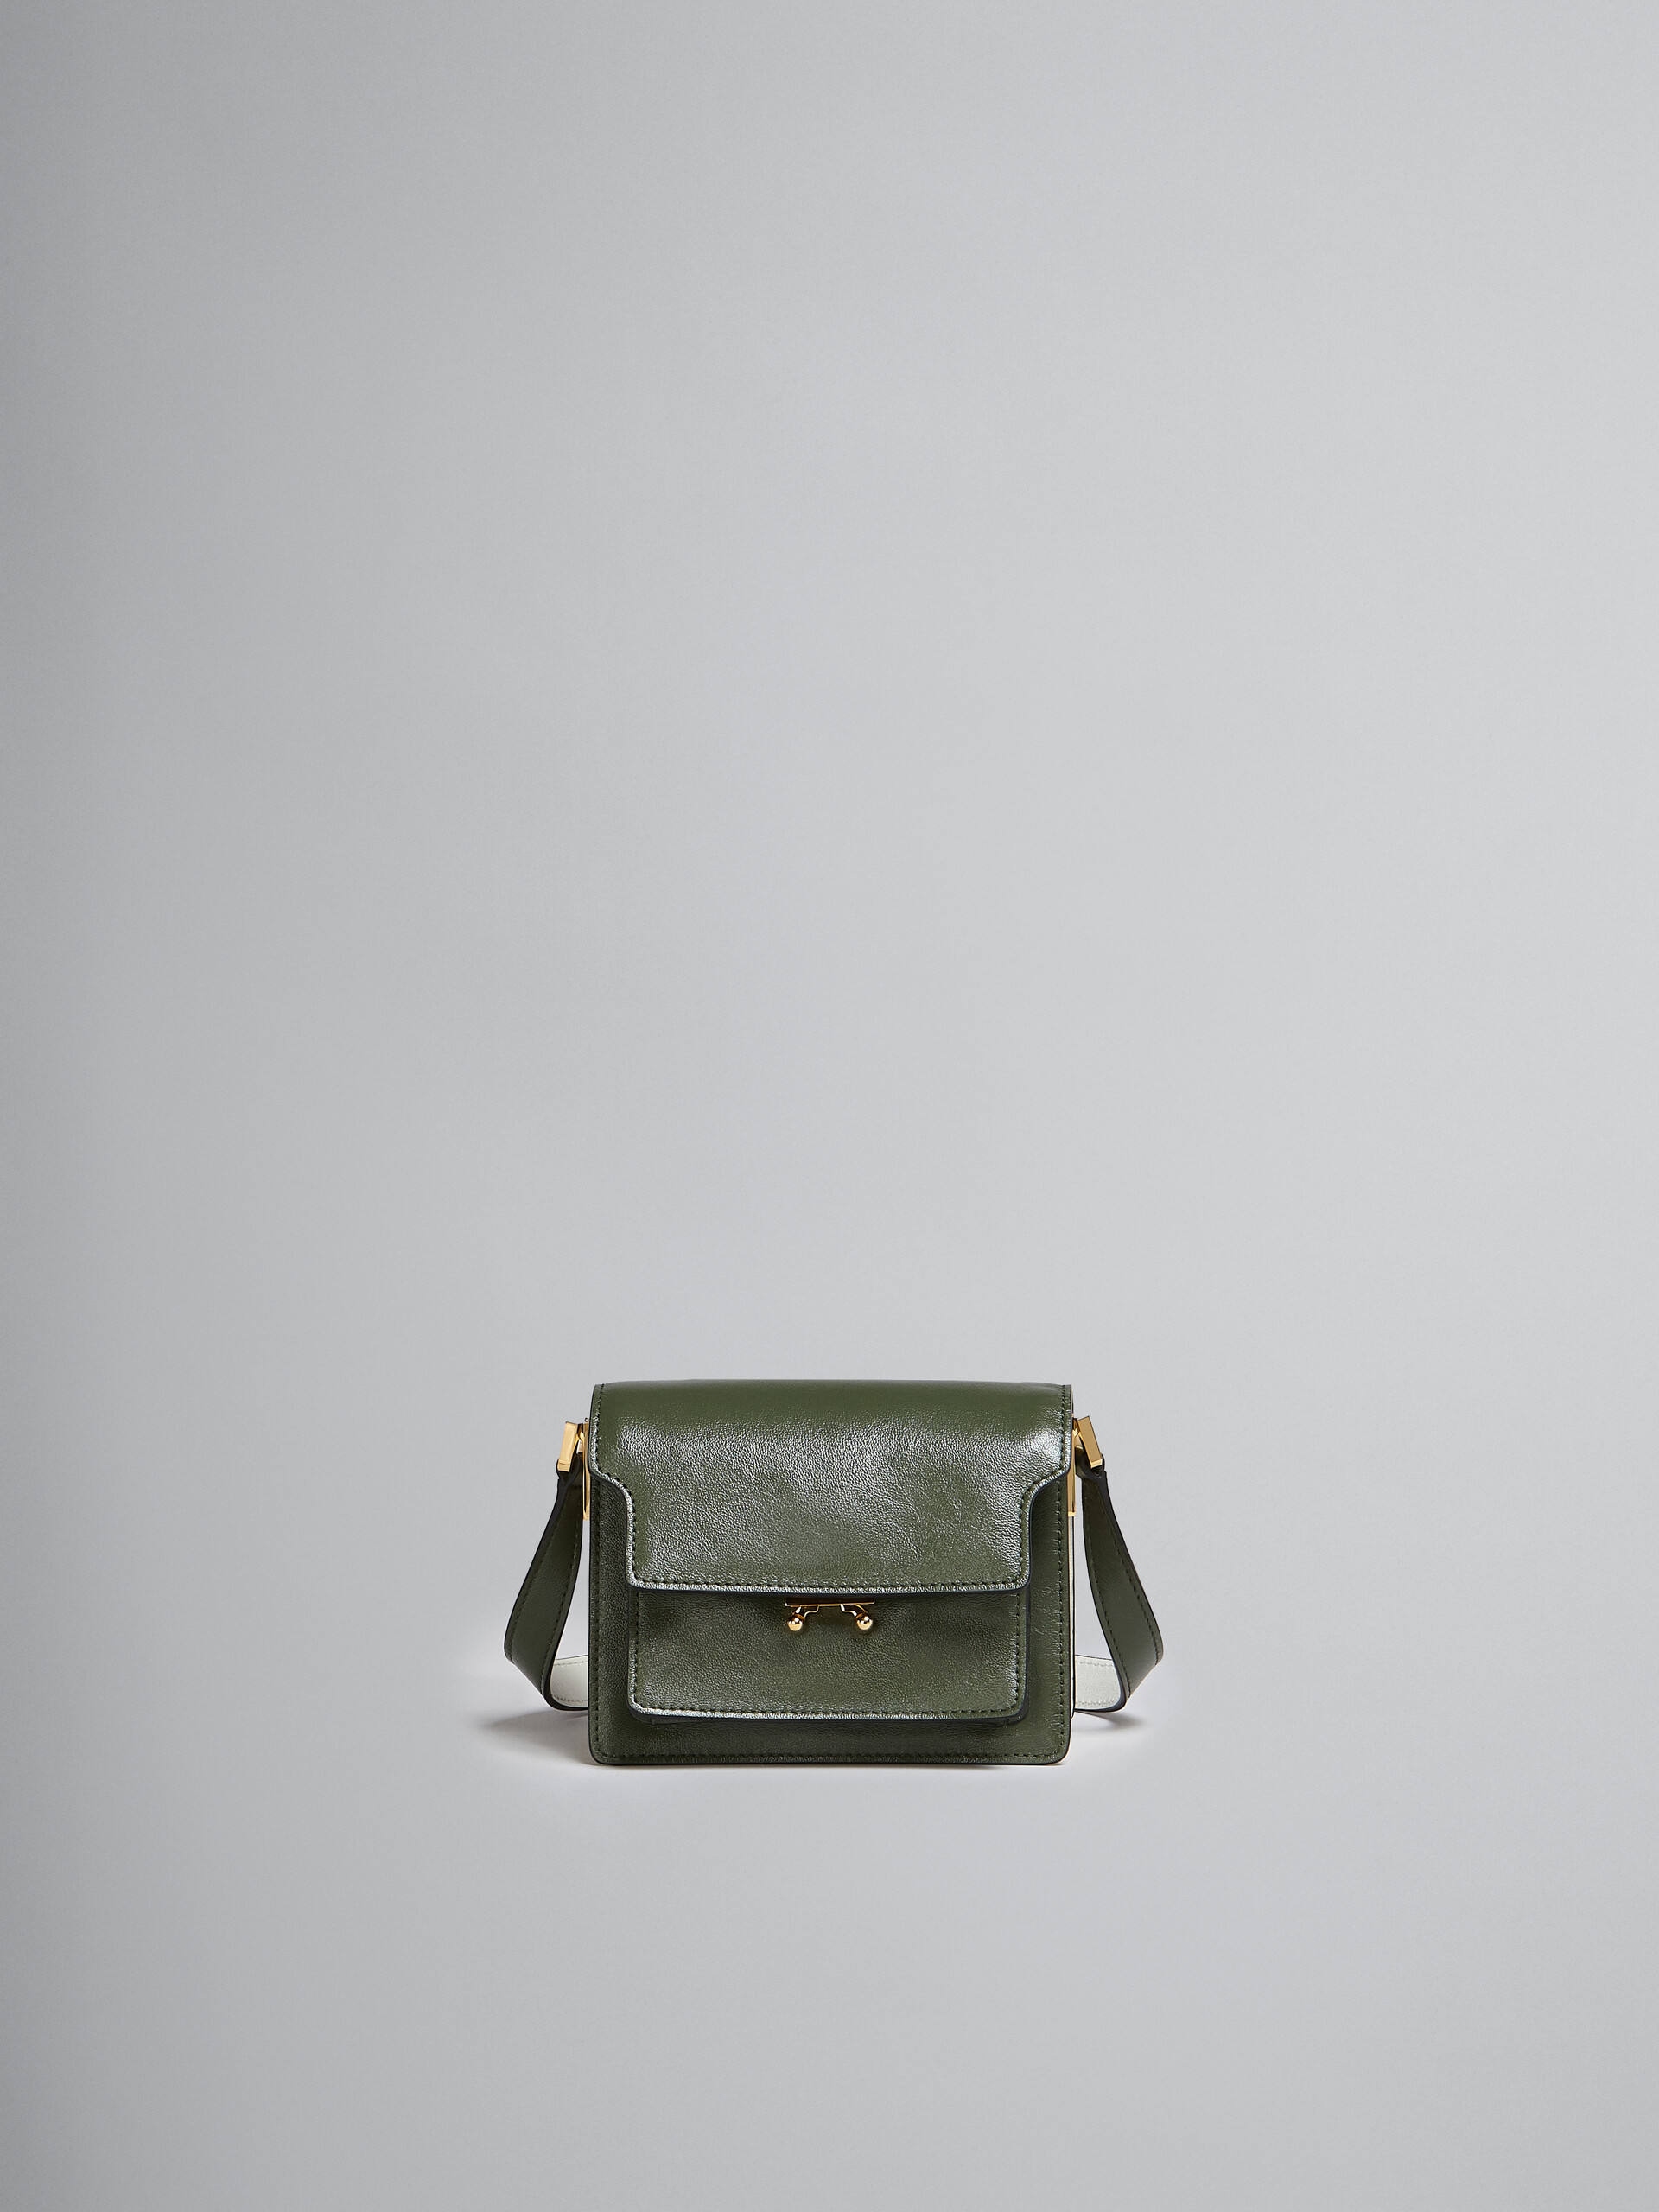 Trunk Soft Mini Bag in green and white leather - Shoulder Bag - Image 1